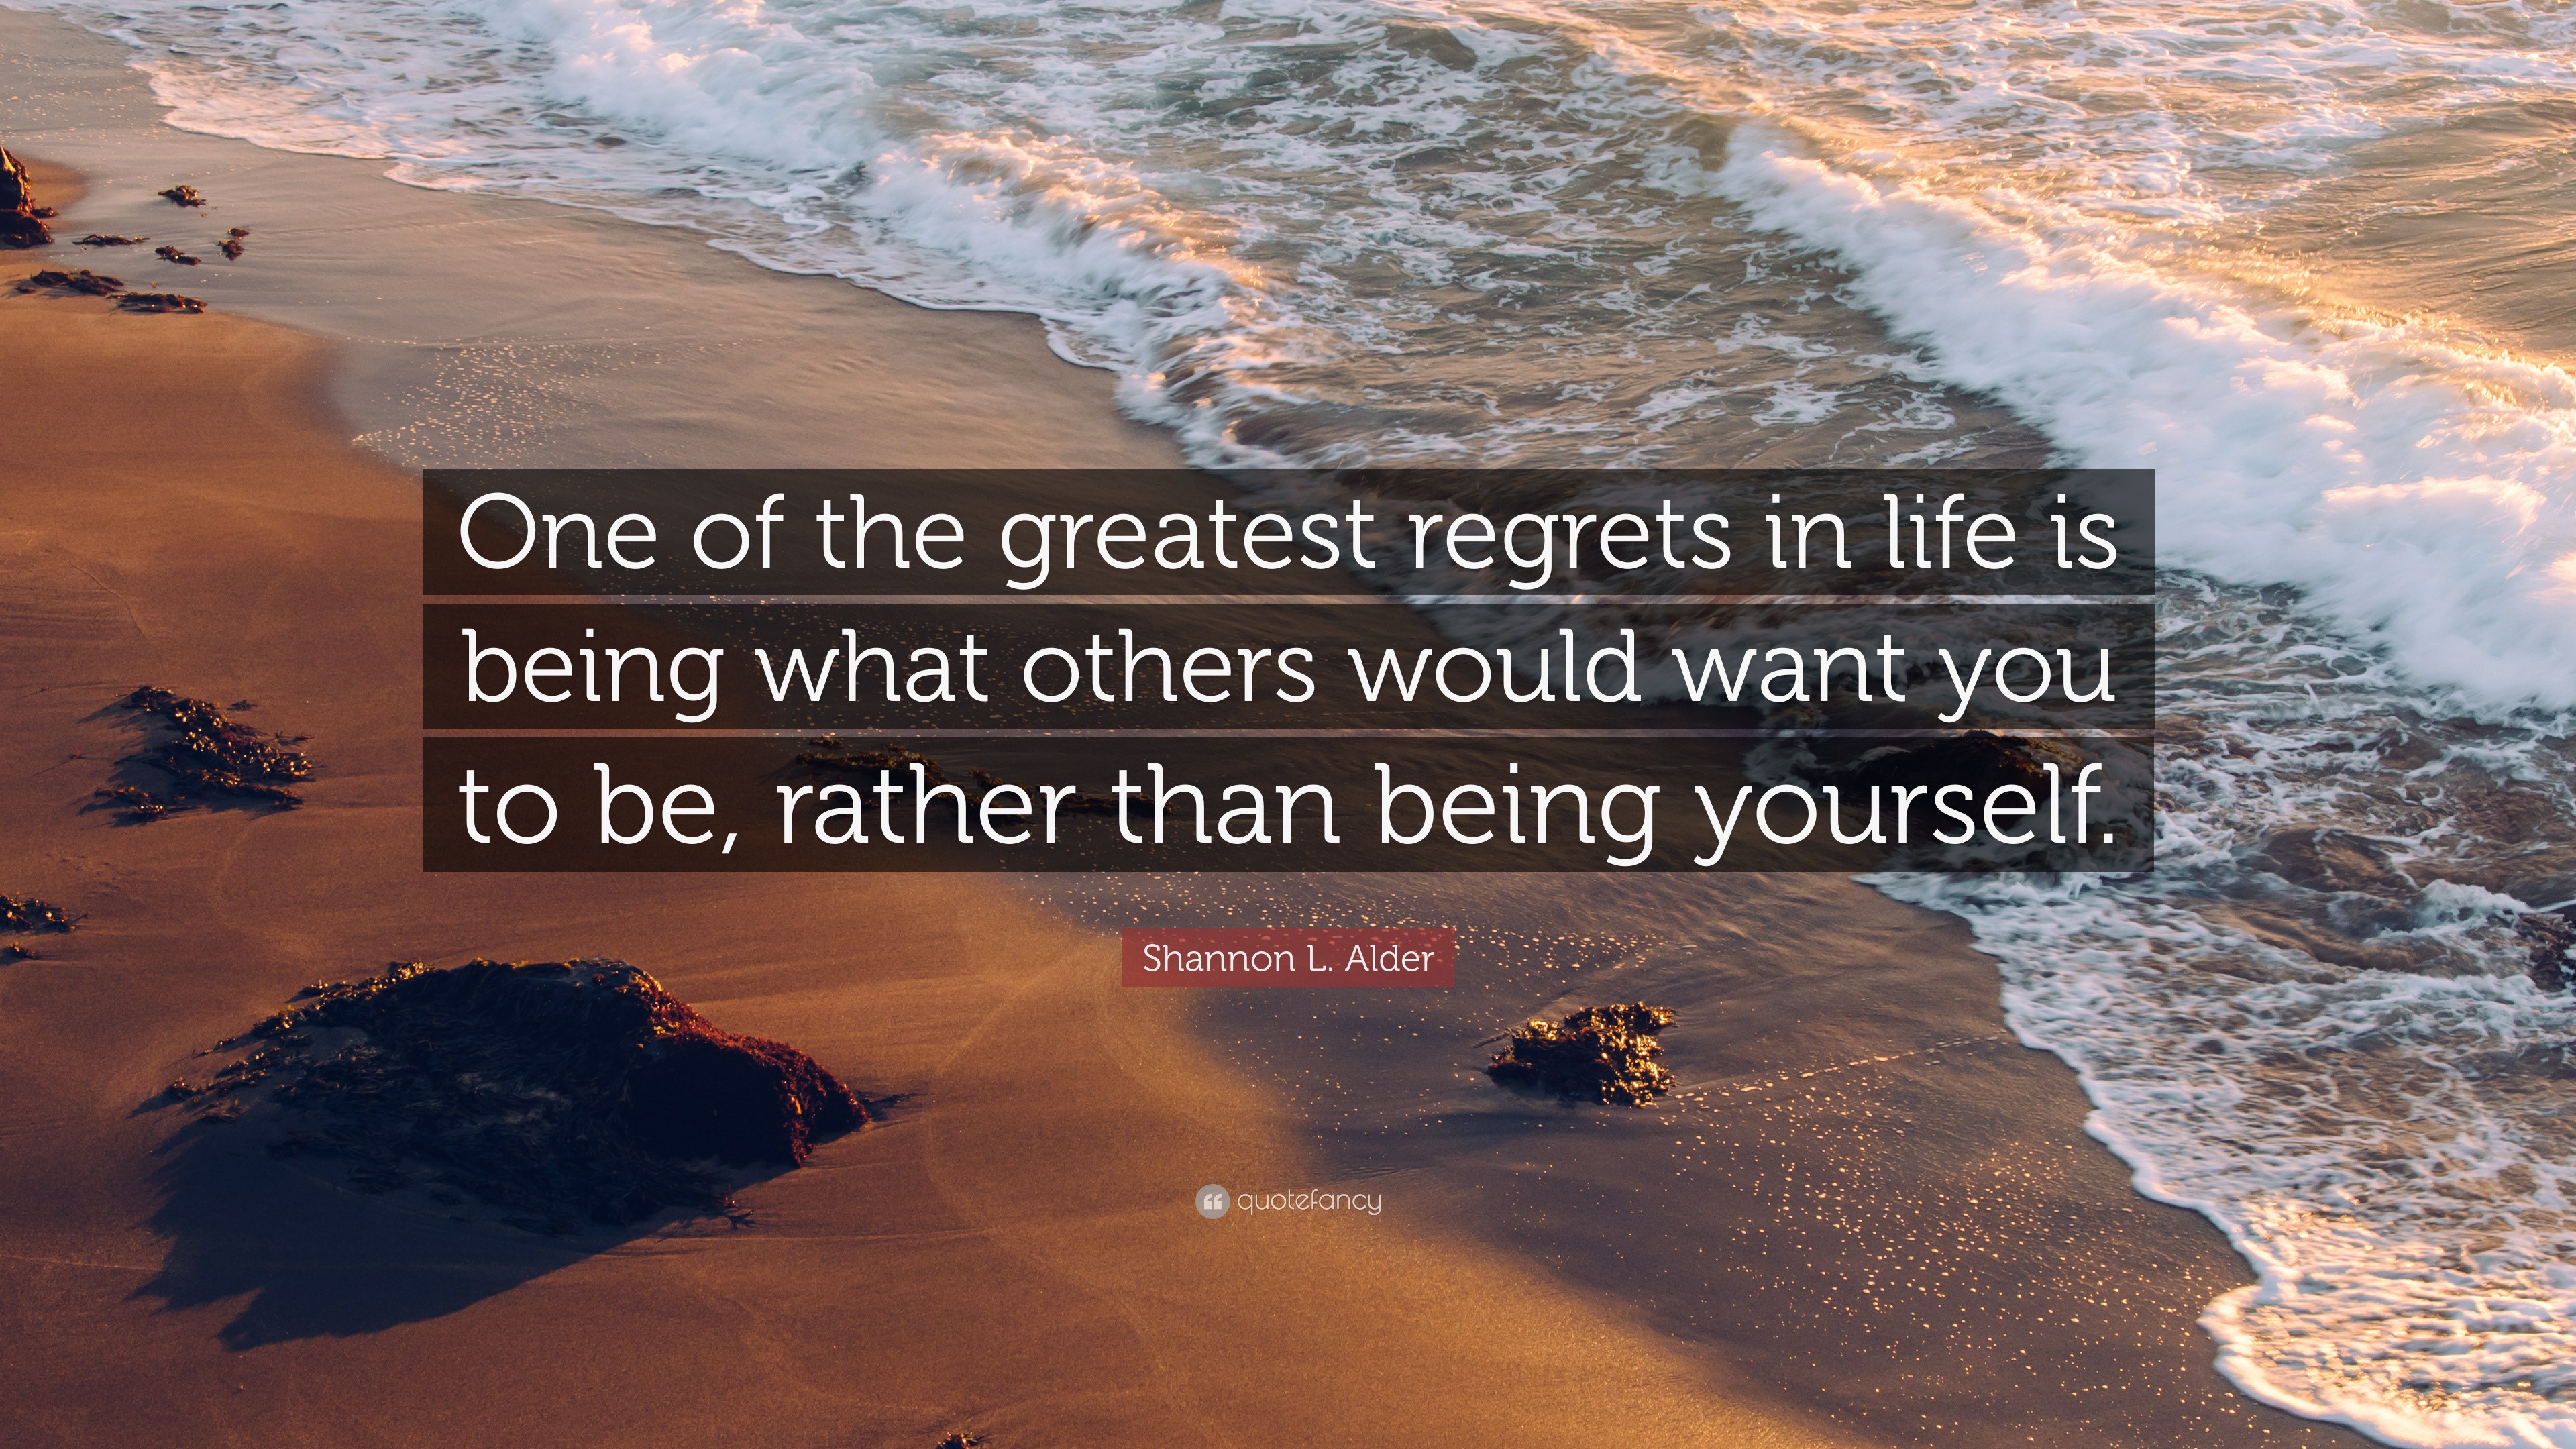 Shannon L. Alder Quote: “One of the greatest regrets in life is being ...